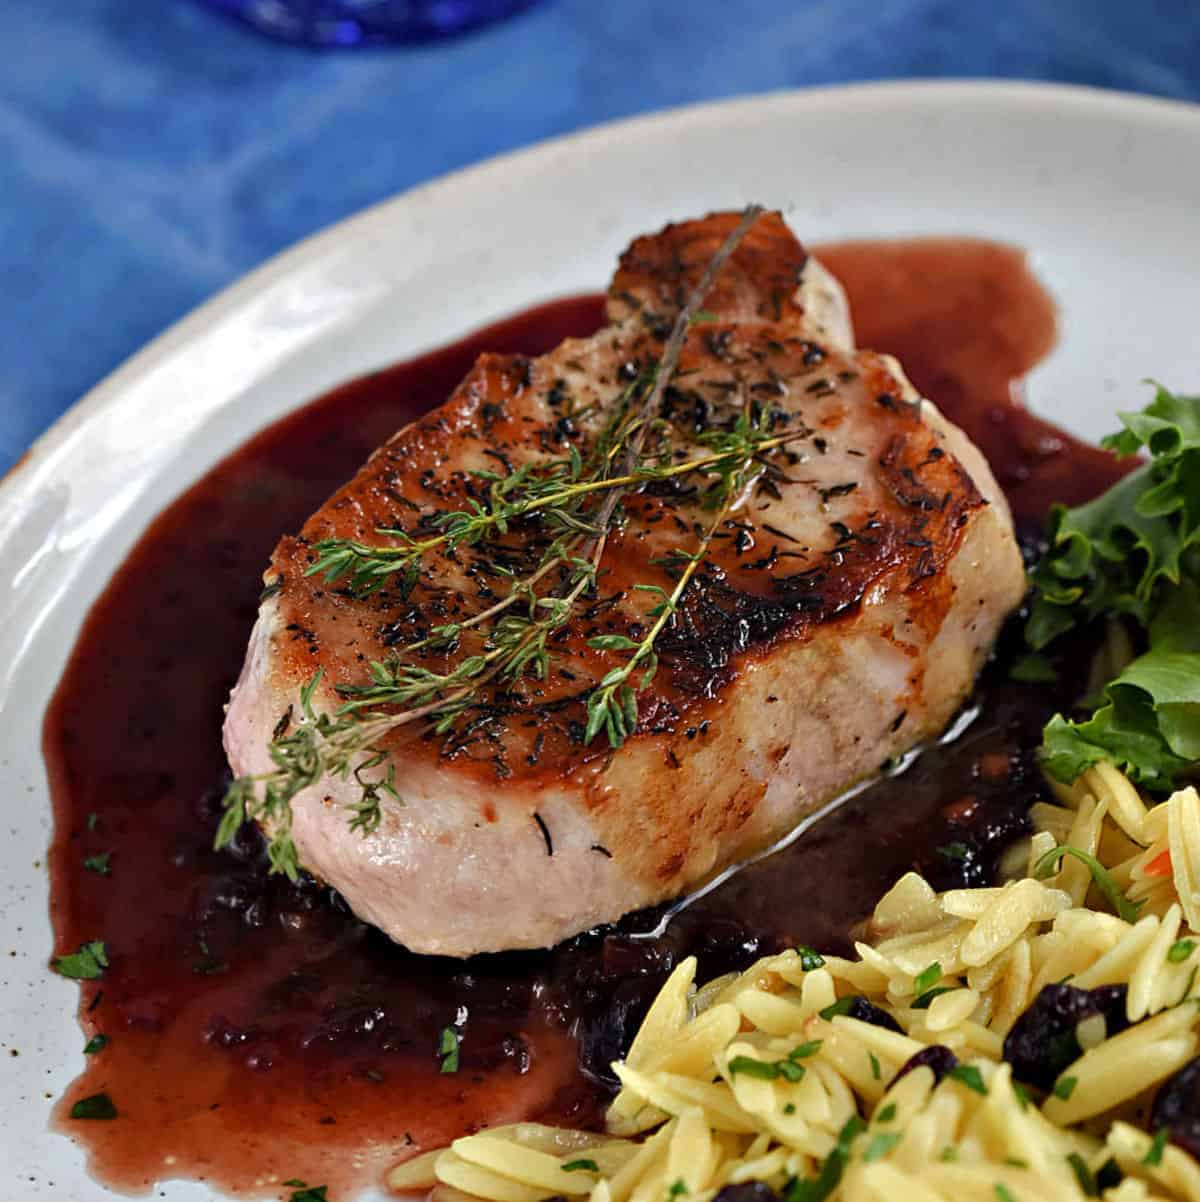 Pork Chops with Cherry Sauce topped with thyme sprigs.